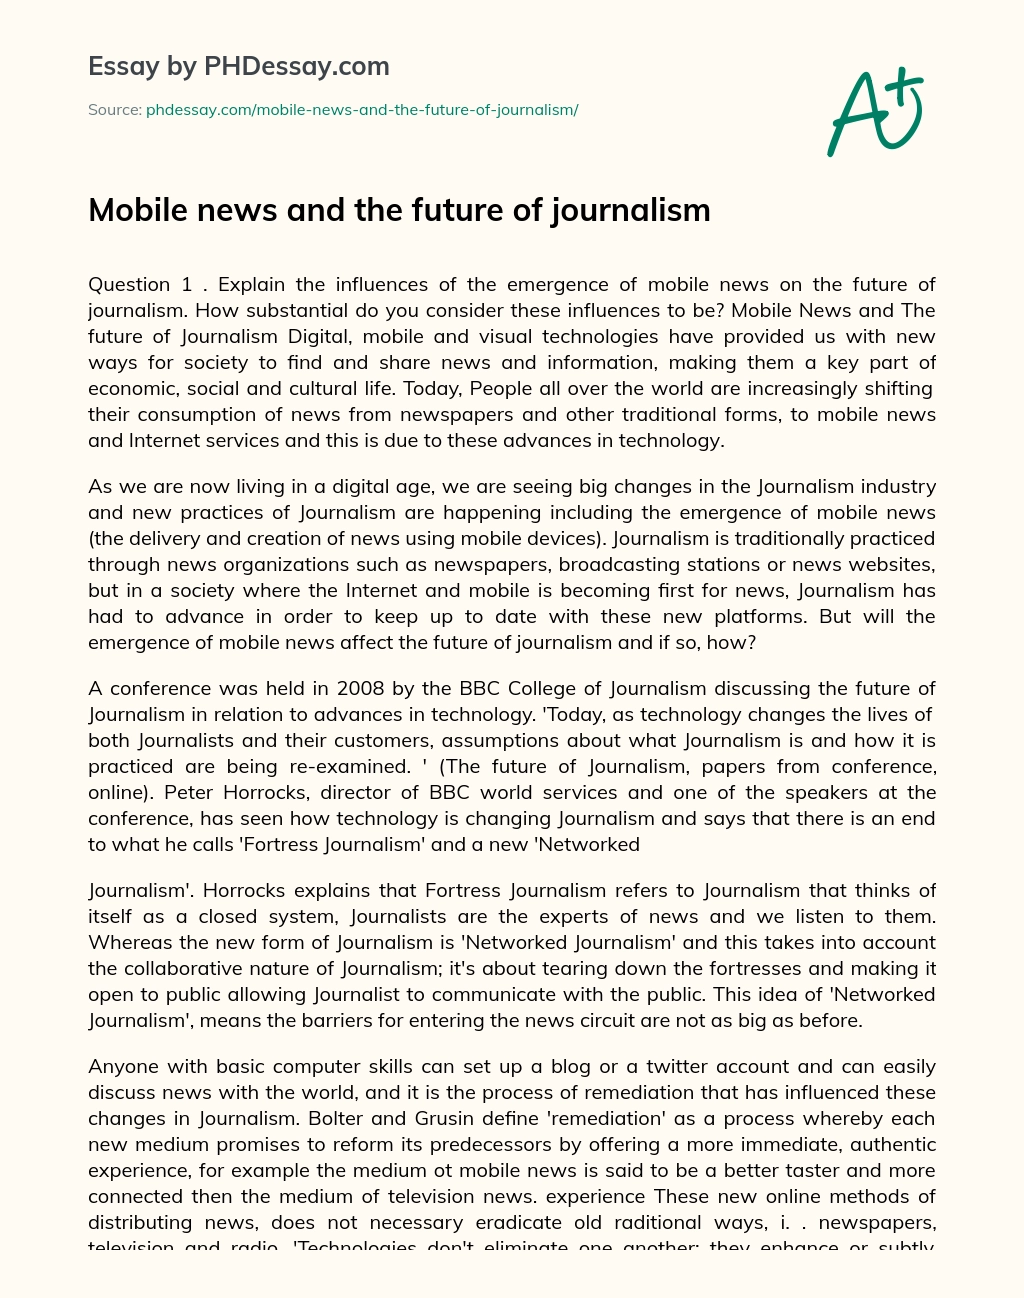 Mobile news and the future of journalism essay